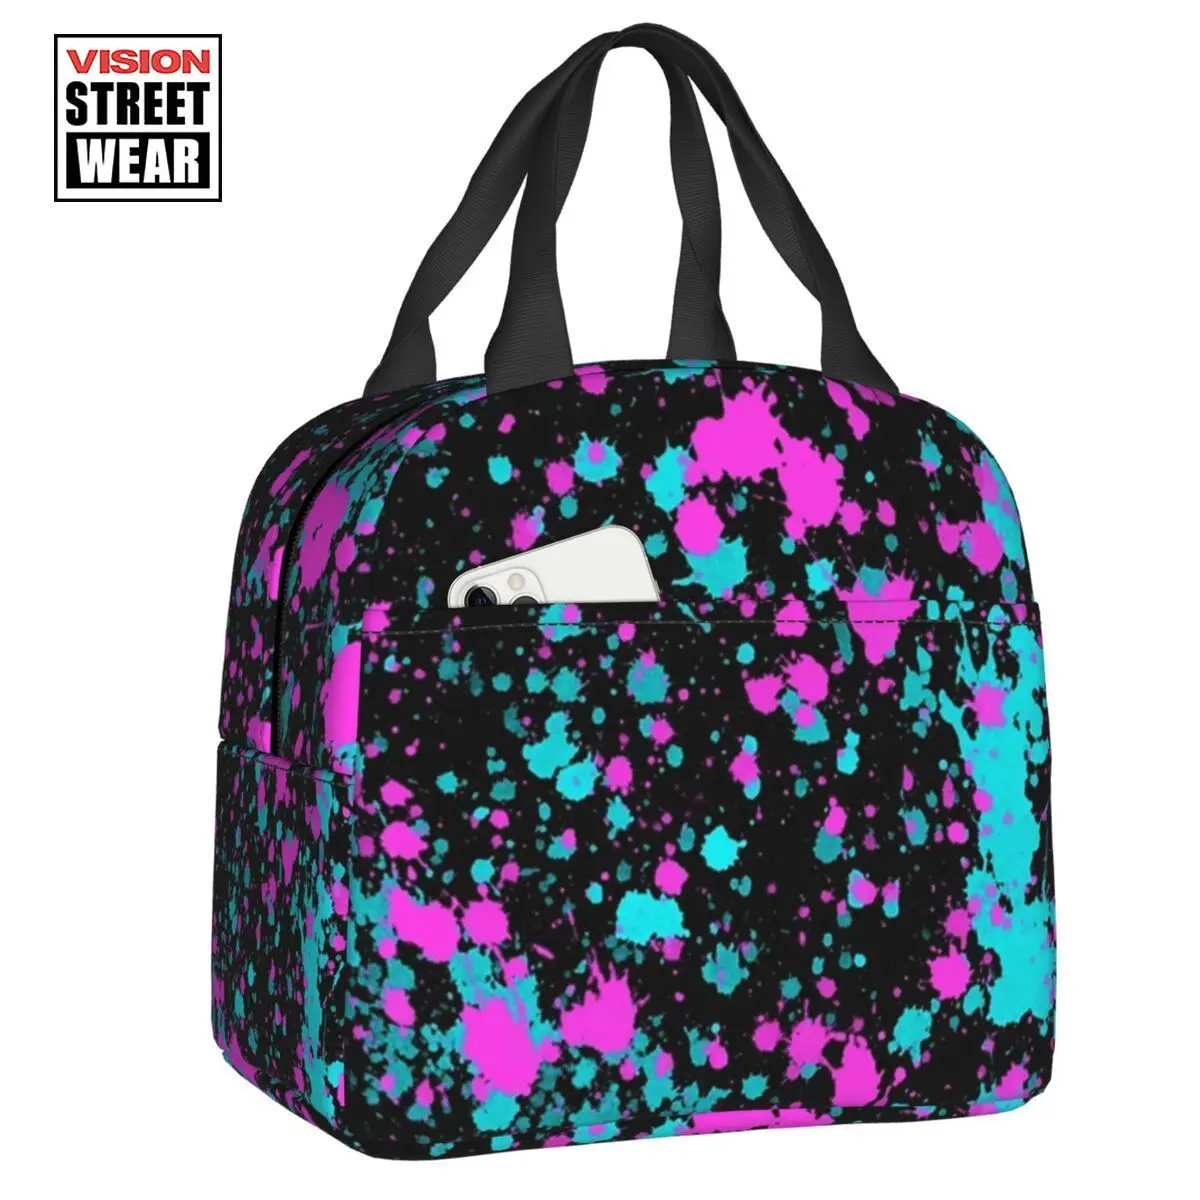 

2023 New Colorful Neon Paint Splatters Insulated Lunch Bag For Outdoor Picnic Artist Graffiti Art Thermal Cooler Bento Box Kids